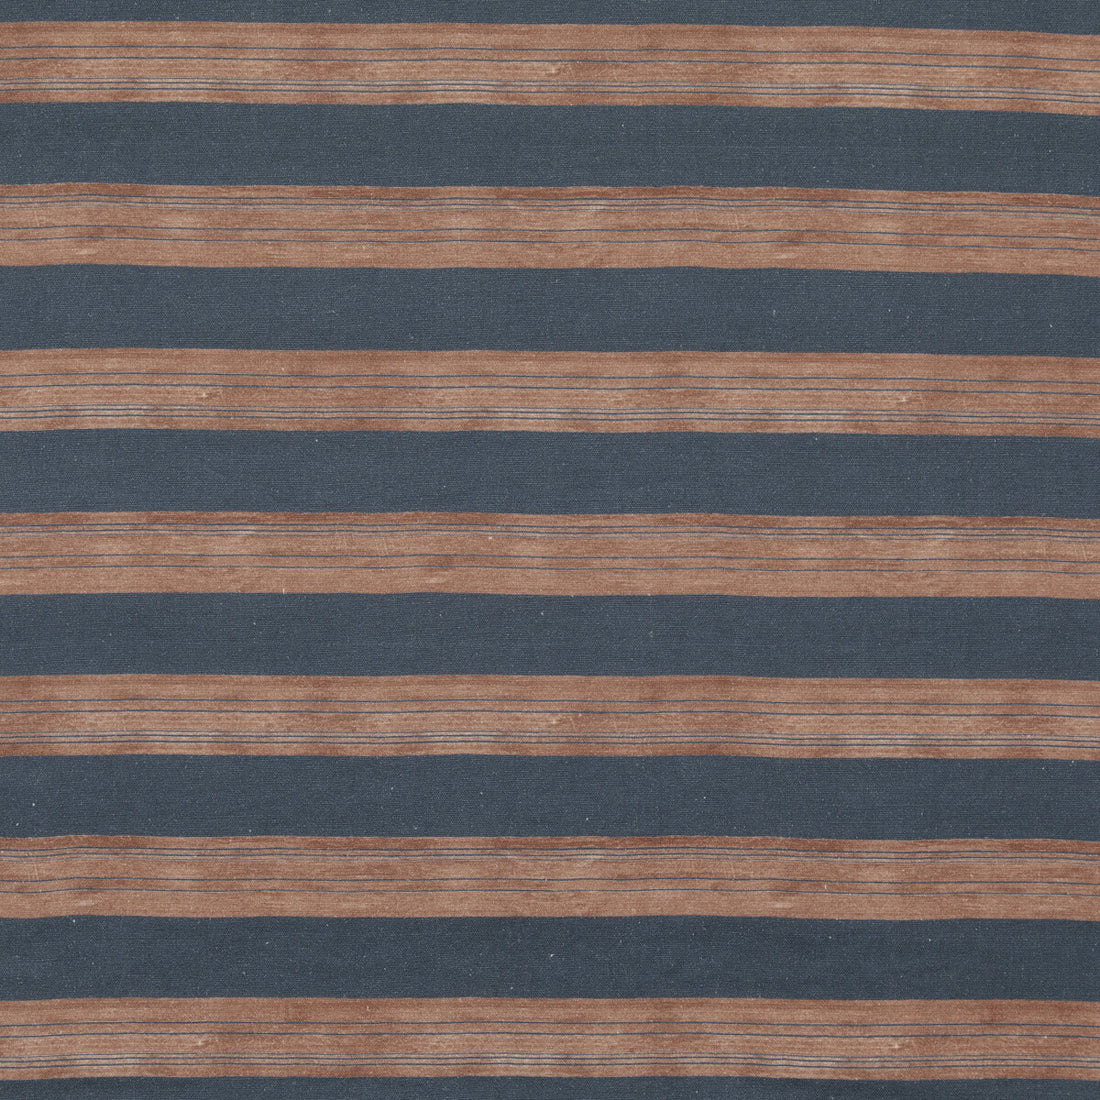 Askew fabric in sienna/navy color - pattern GWF-3724.524.0 - by Lee Jofa Modern in the Kelly Wearstler IV collection